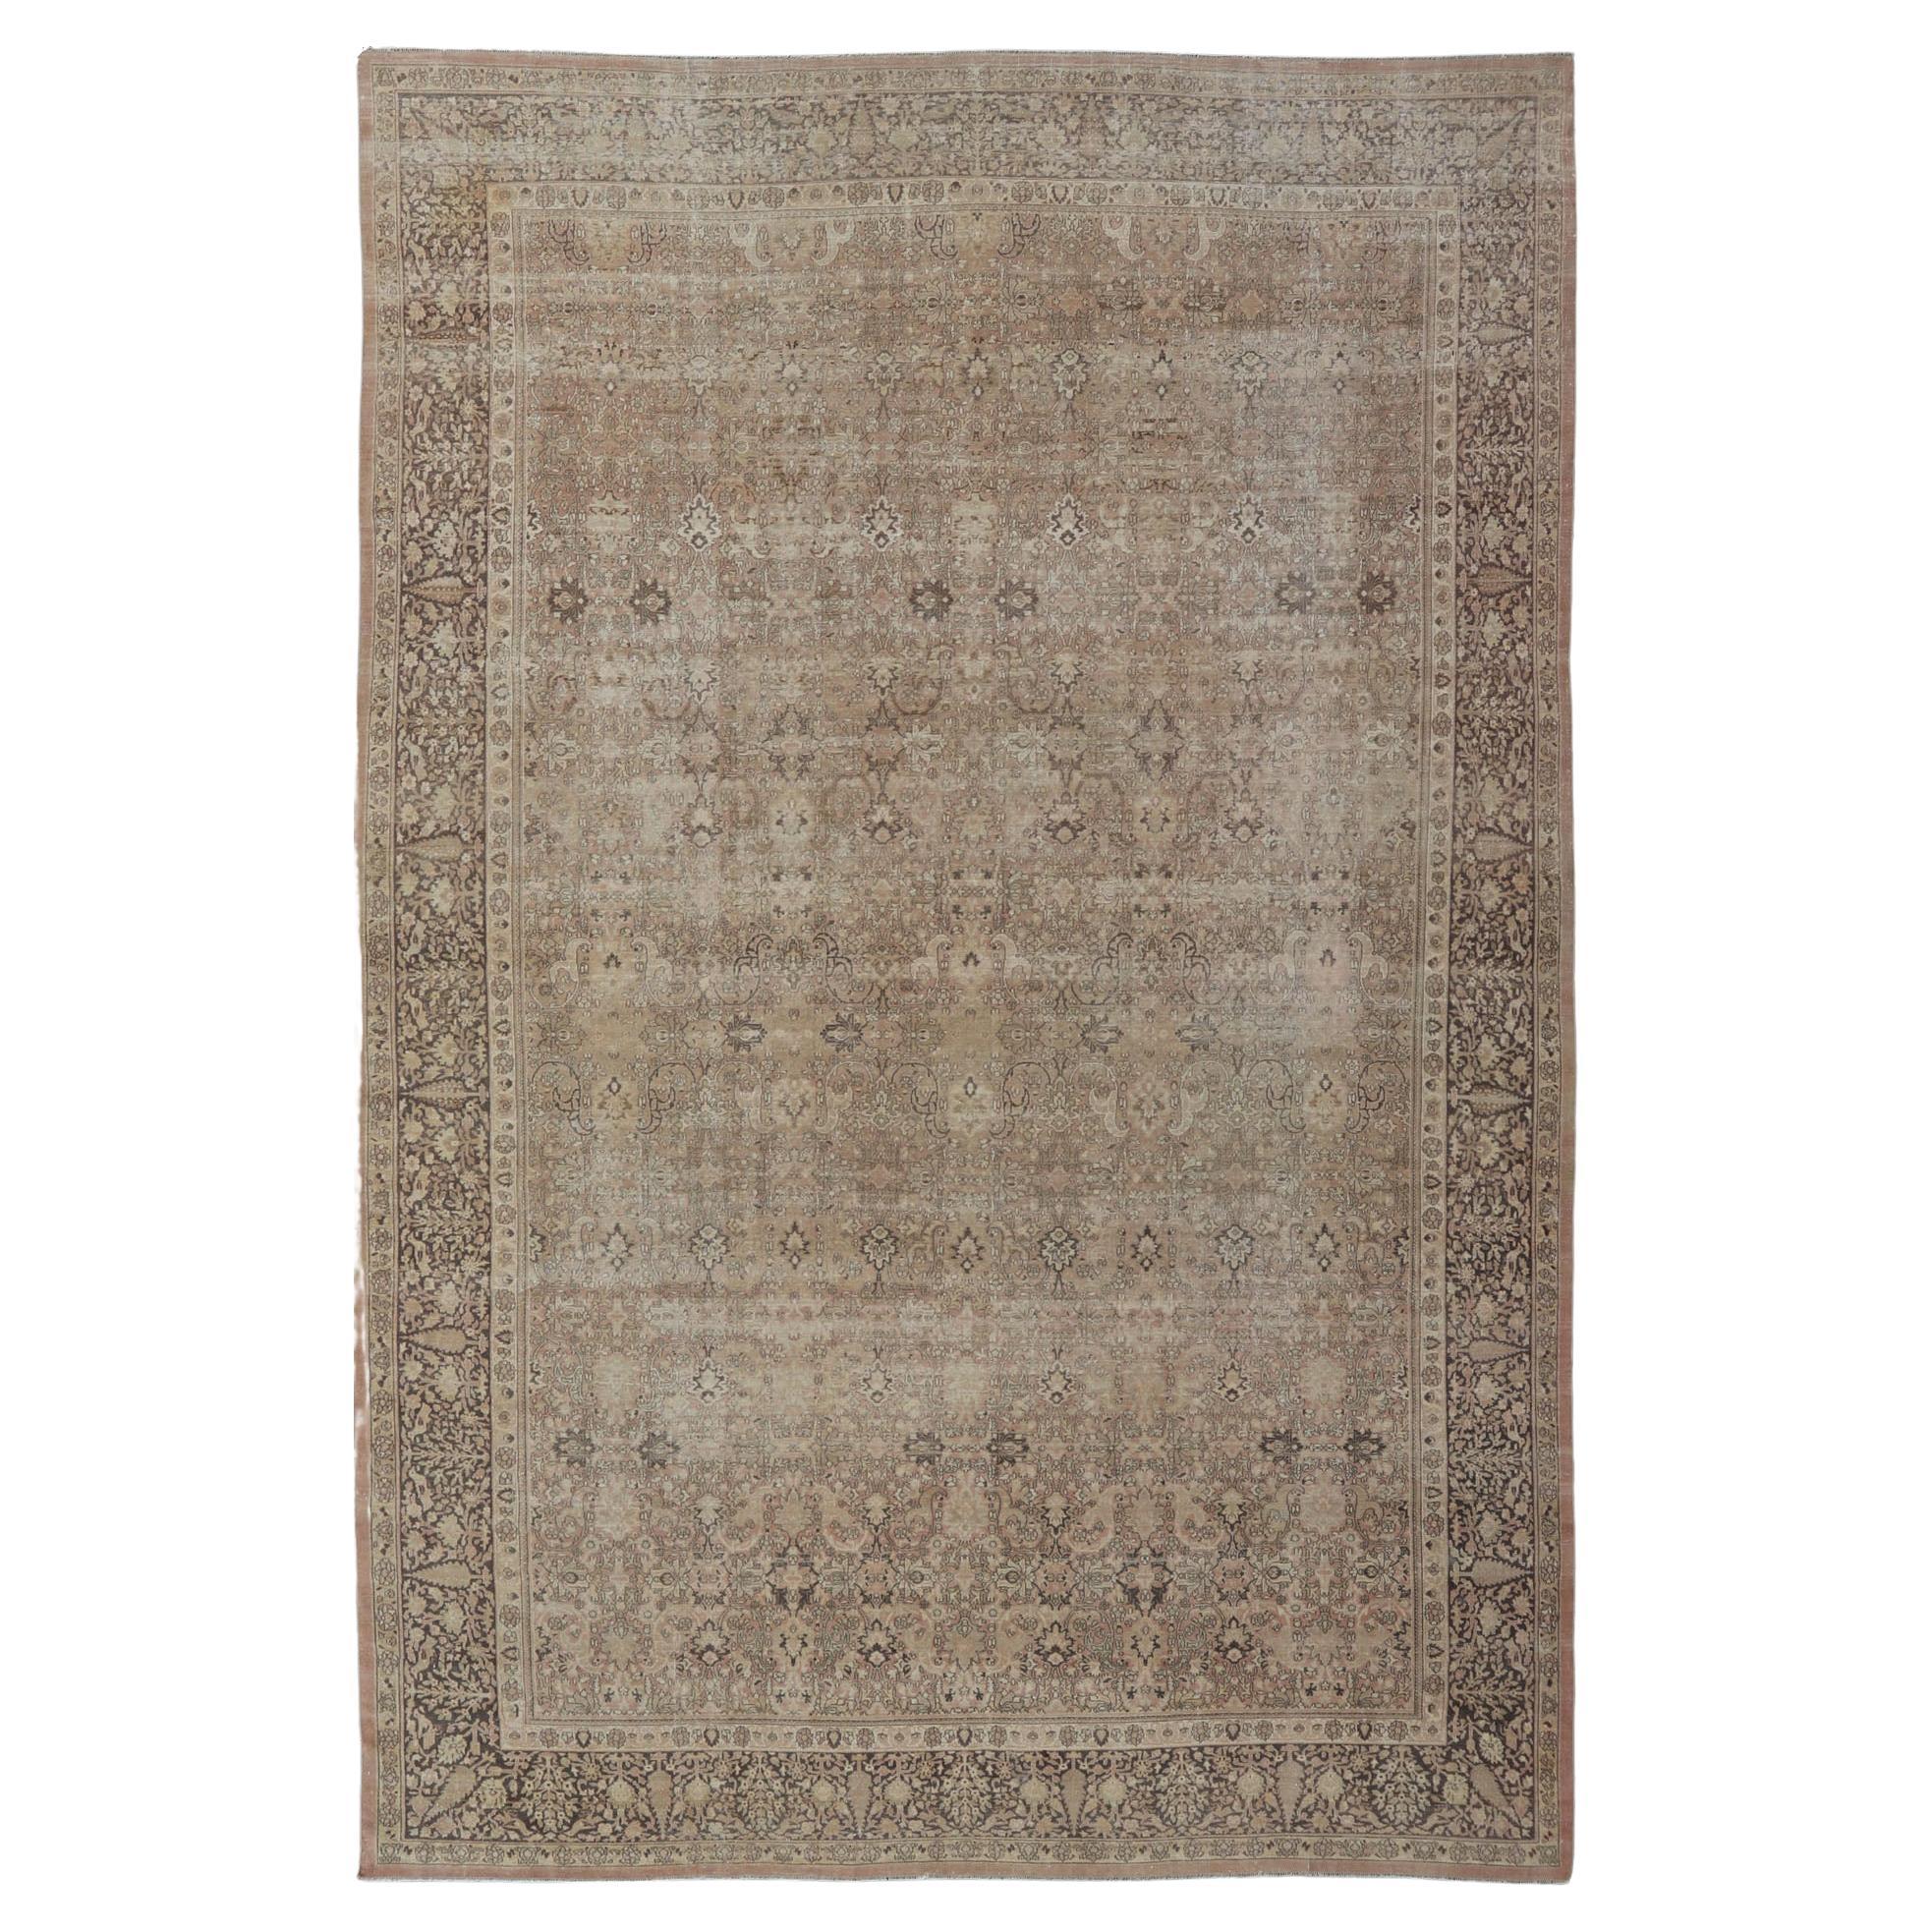 Large Antique Turkish Sivas Rug with Floral Design in Earthy Neutral Tones 